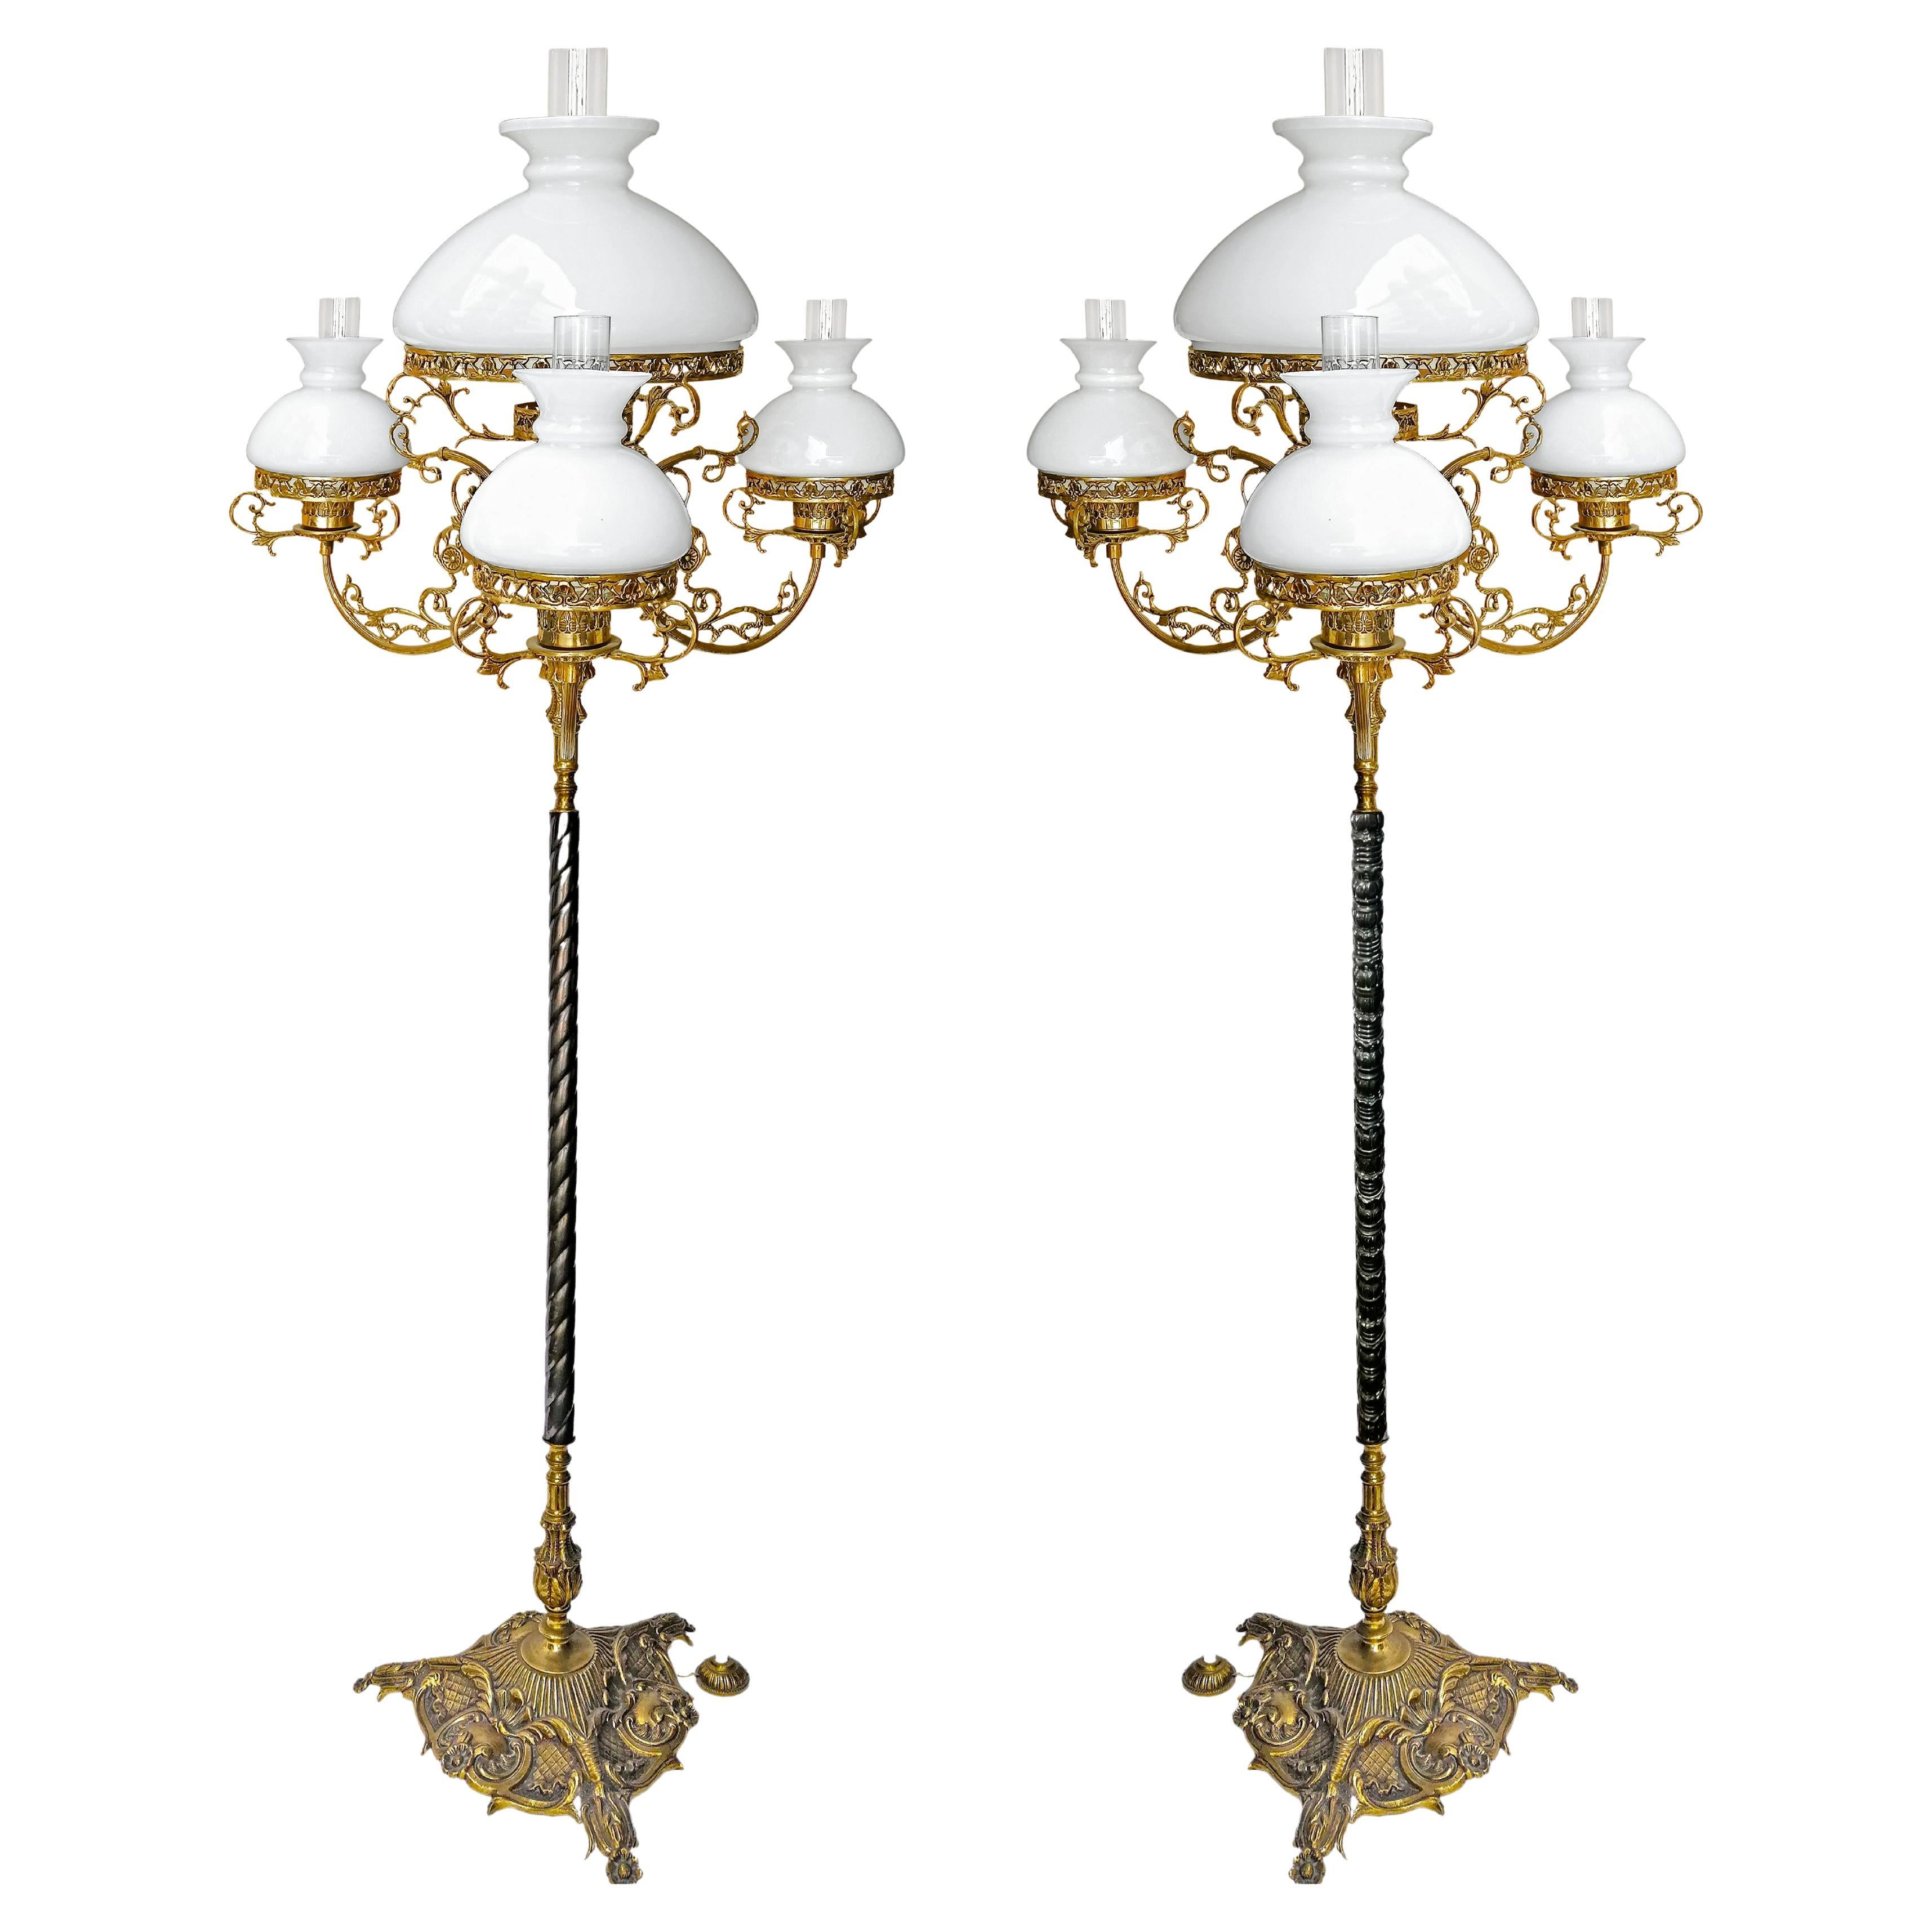 Pair of French Victorian Oil Floor Lamps in Ornate Gilt Bronze & Opaline Glass For Sale